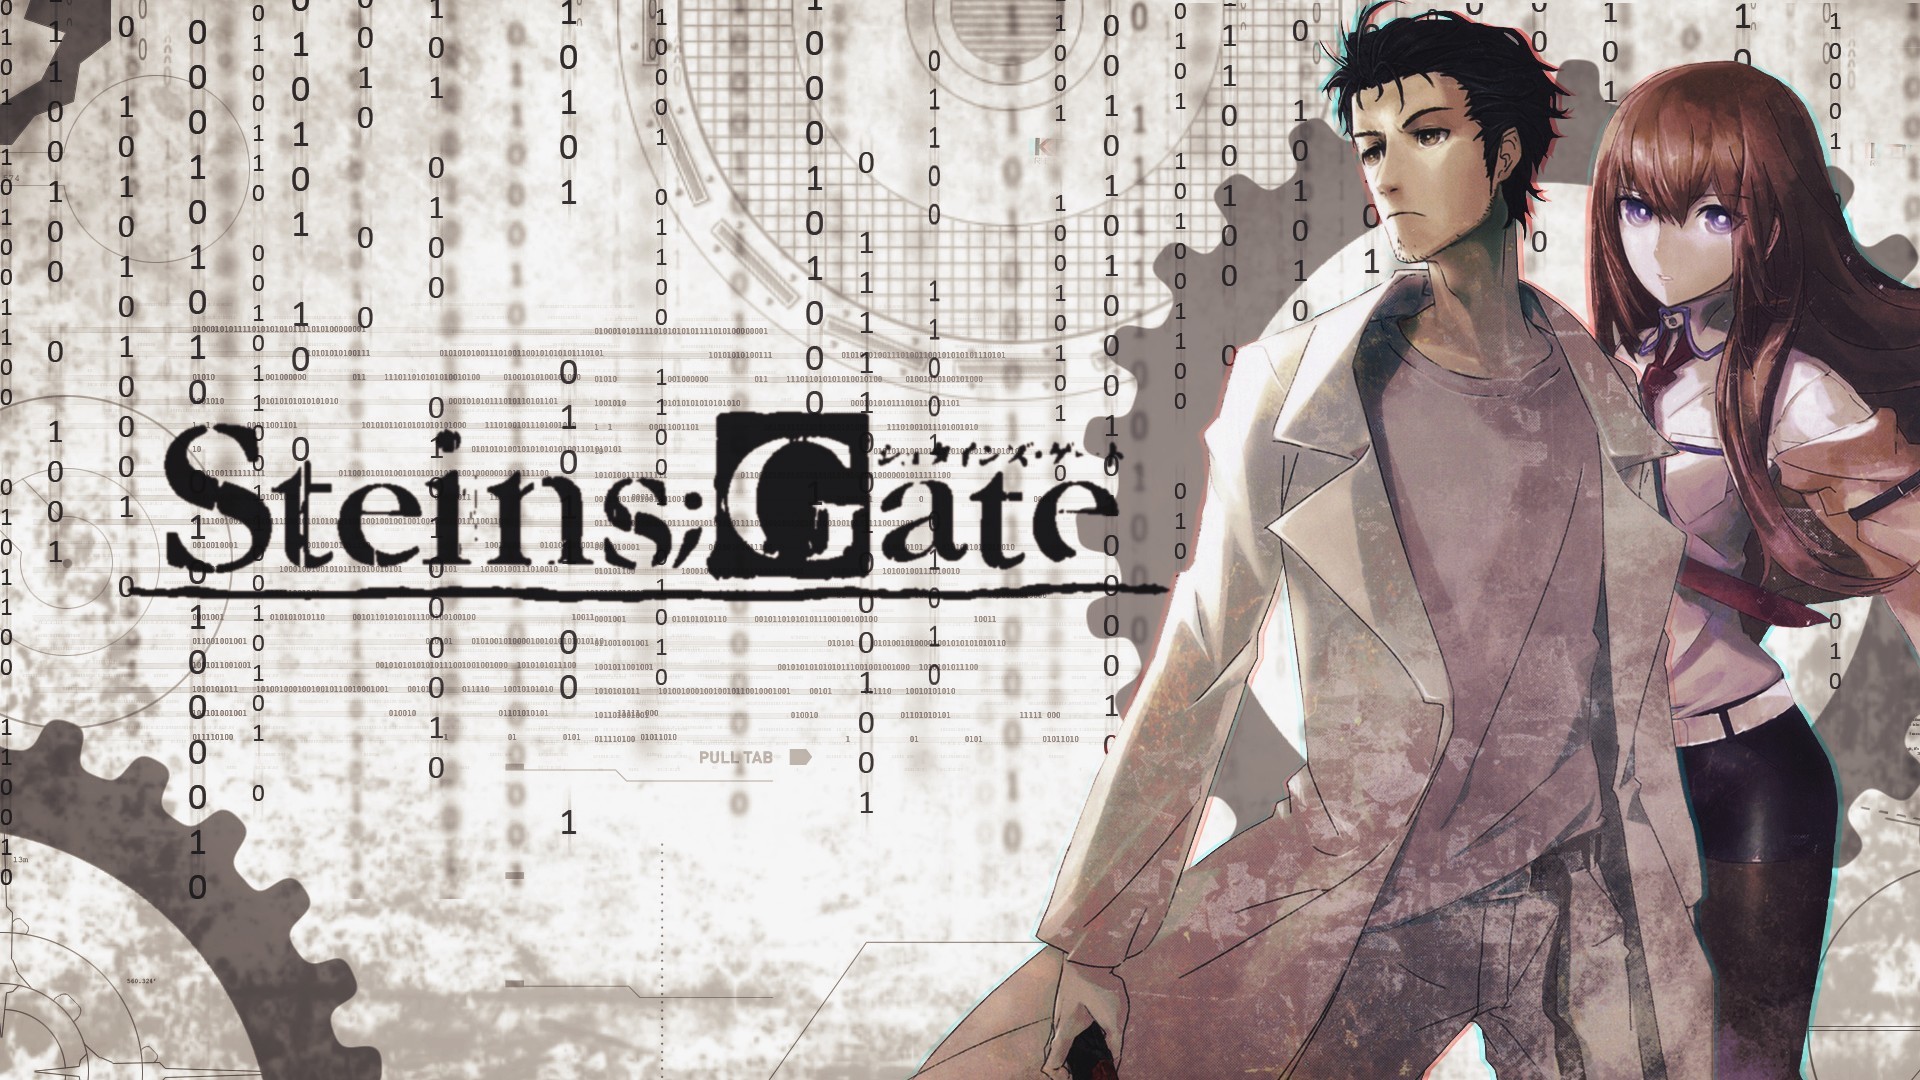 1920x1080 Steins Gate wallpapers